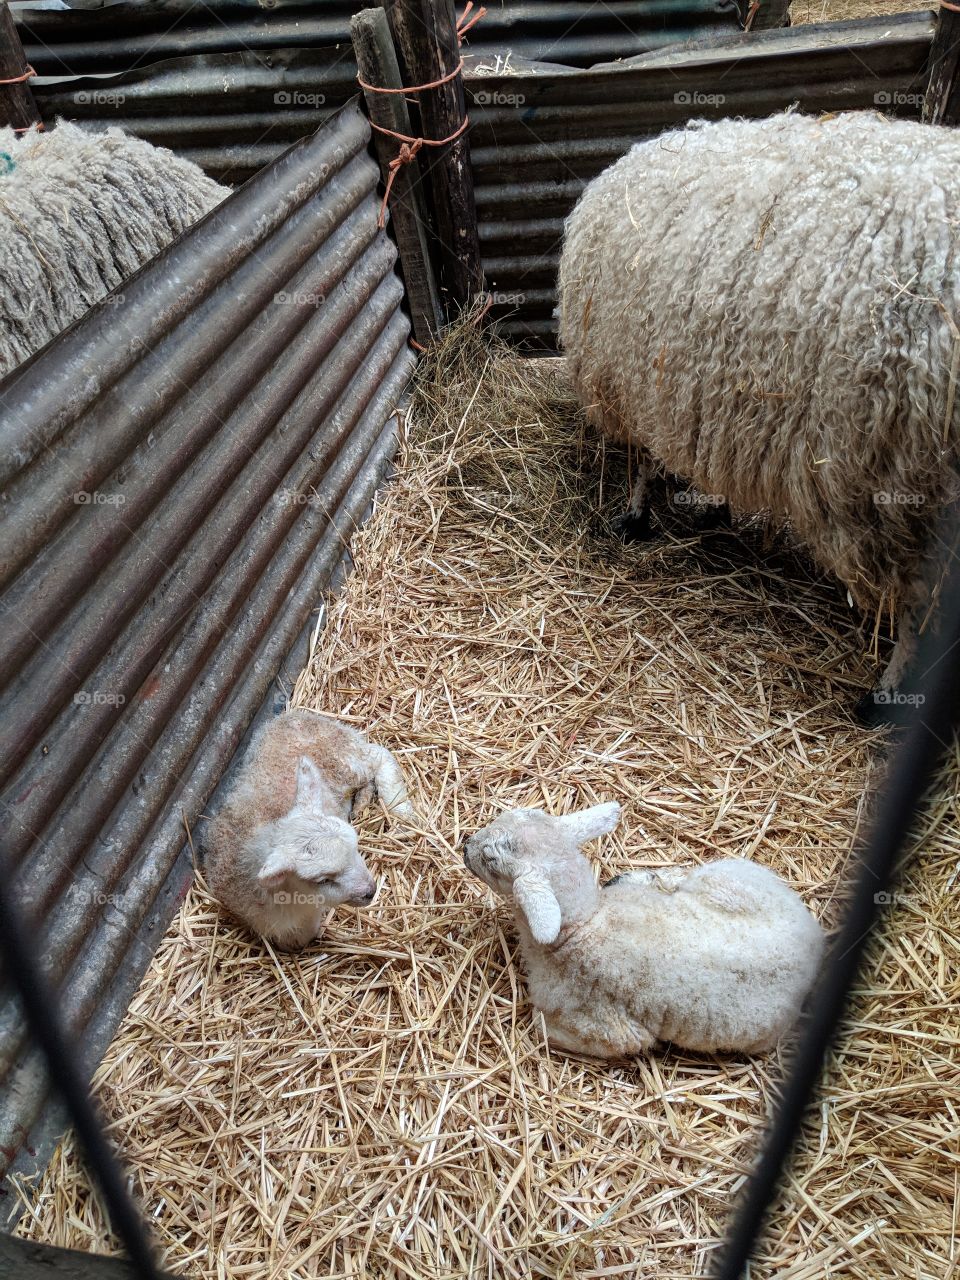 Mother sheep with newborn lambs